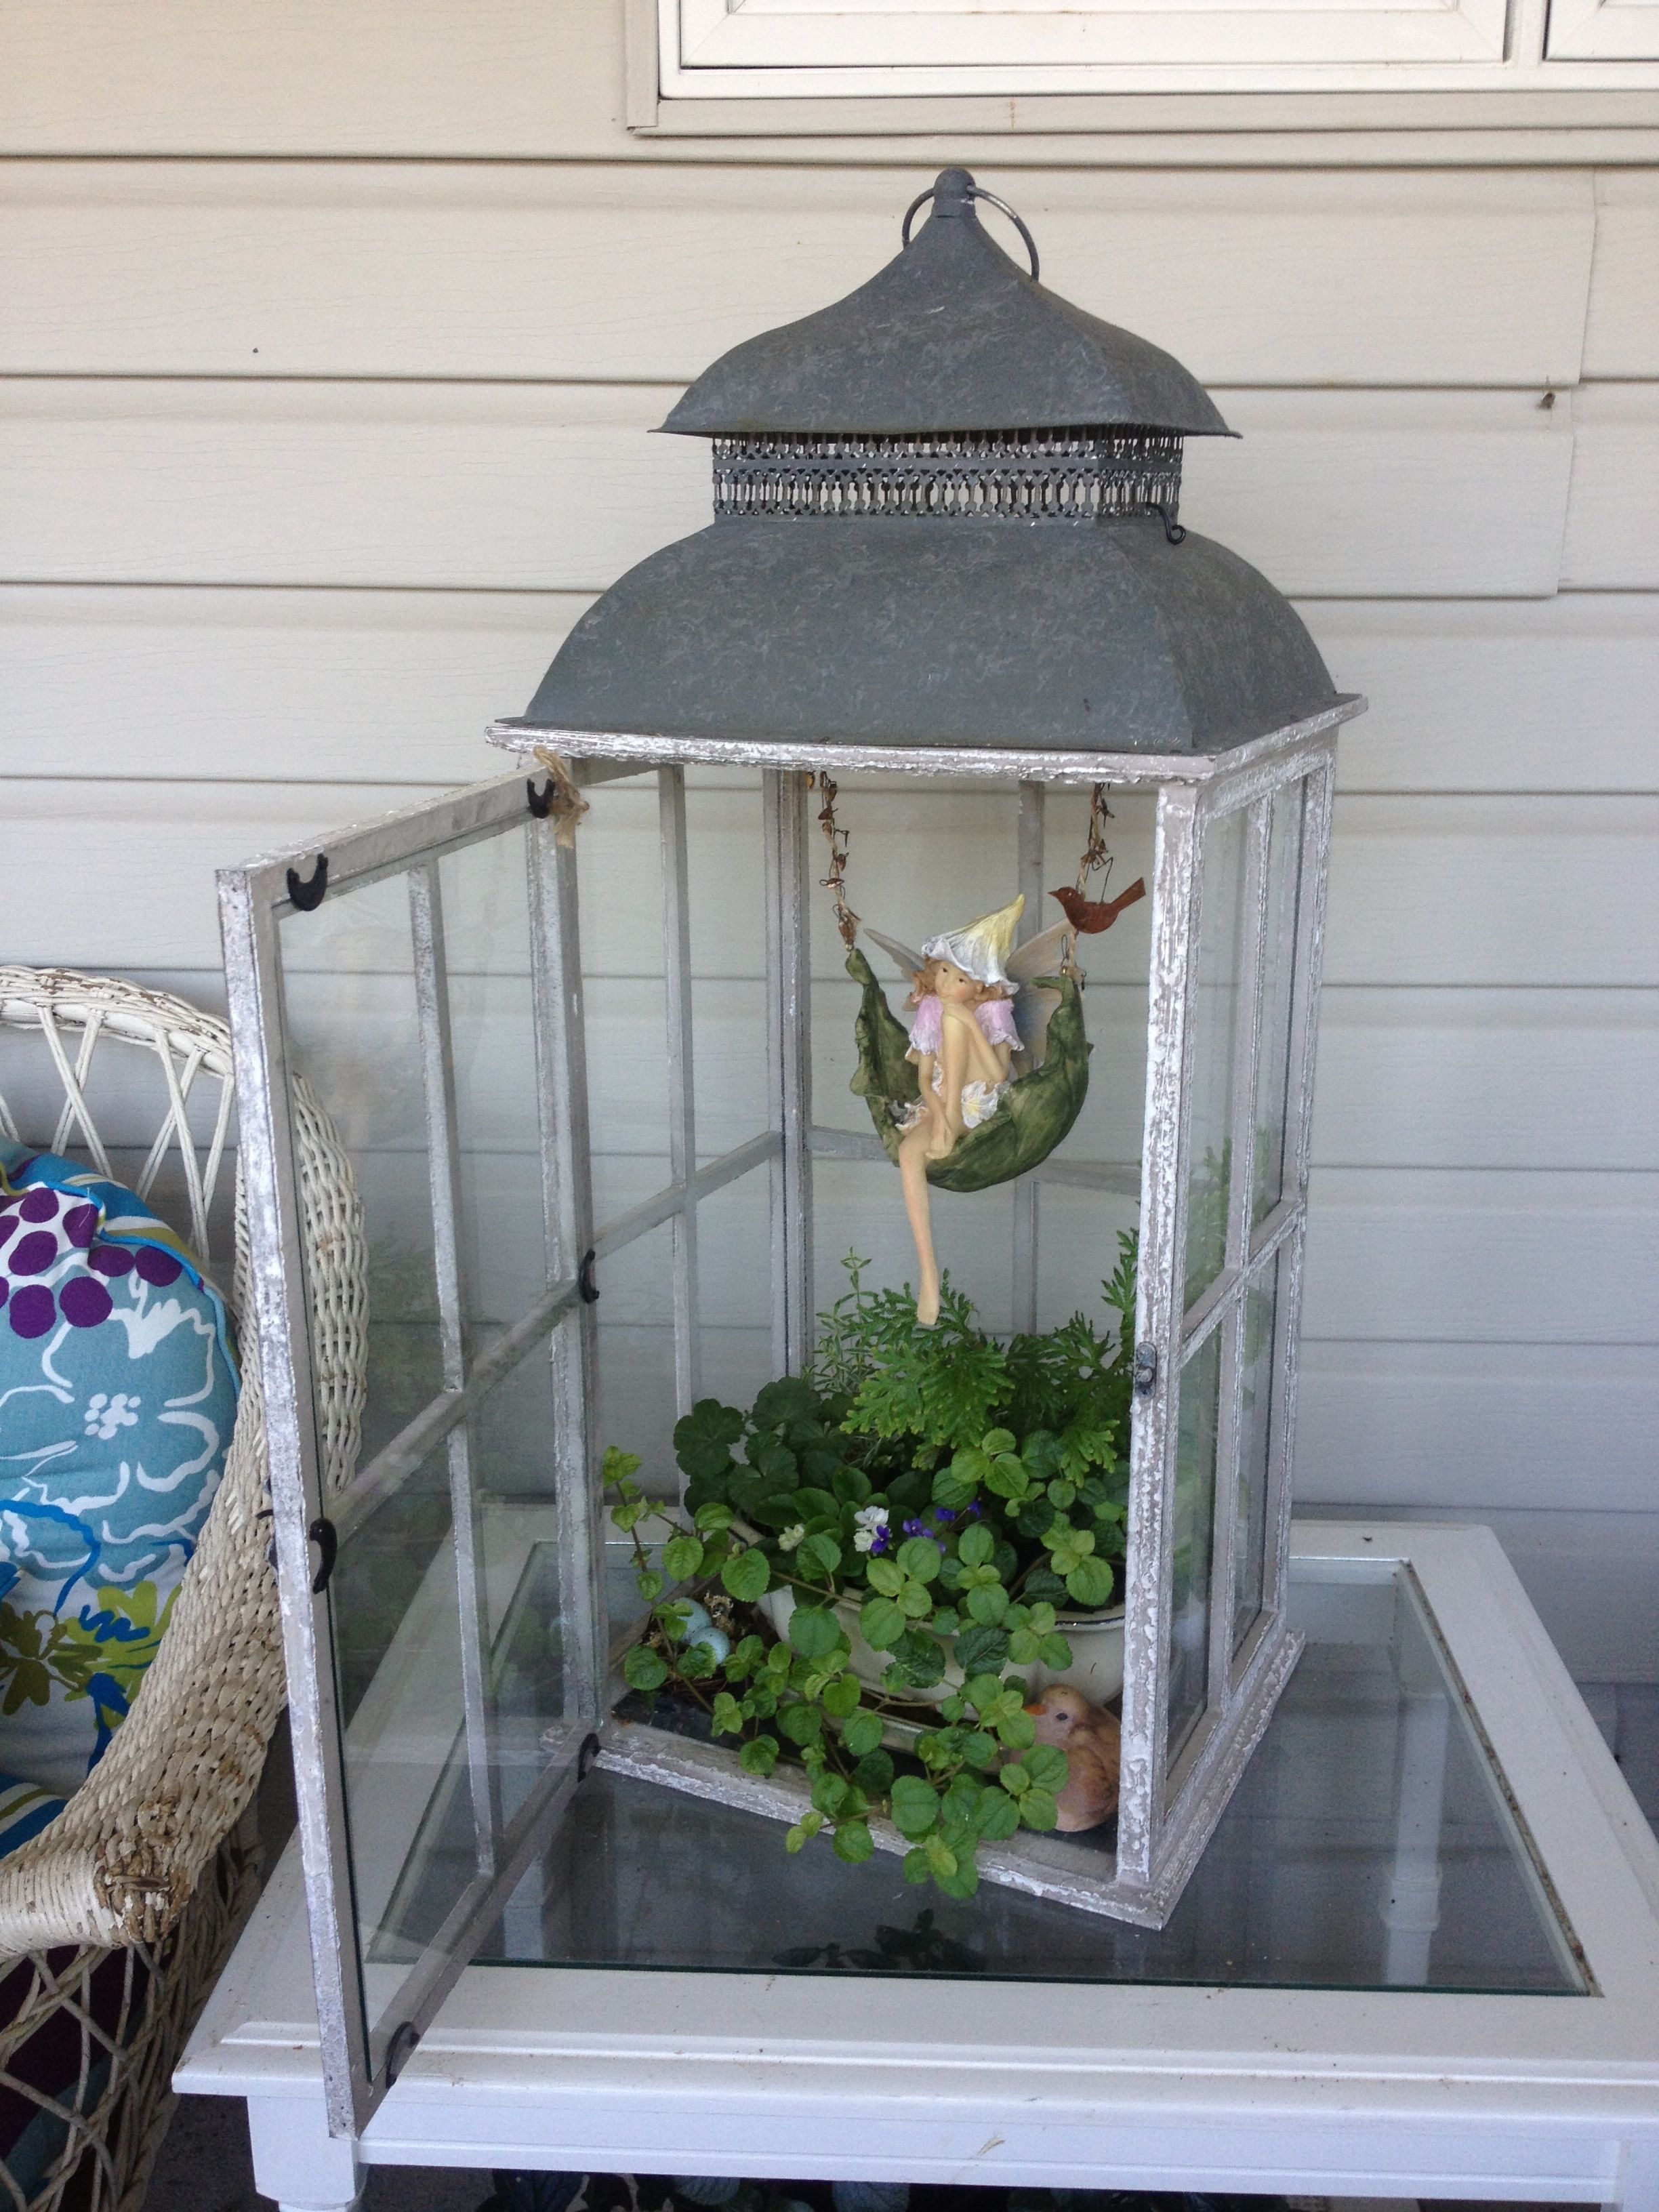 Faerie Garden in a lantern!  I already have a black wrought iron stand with 3 lanterns too …